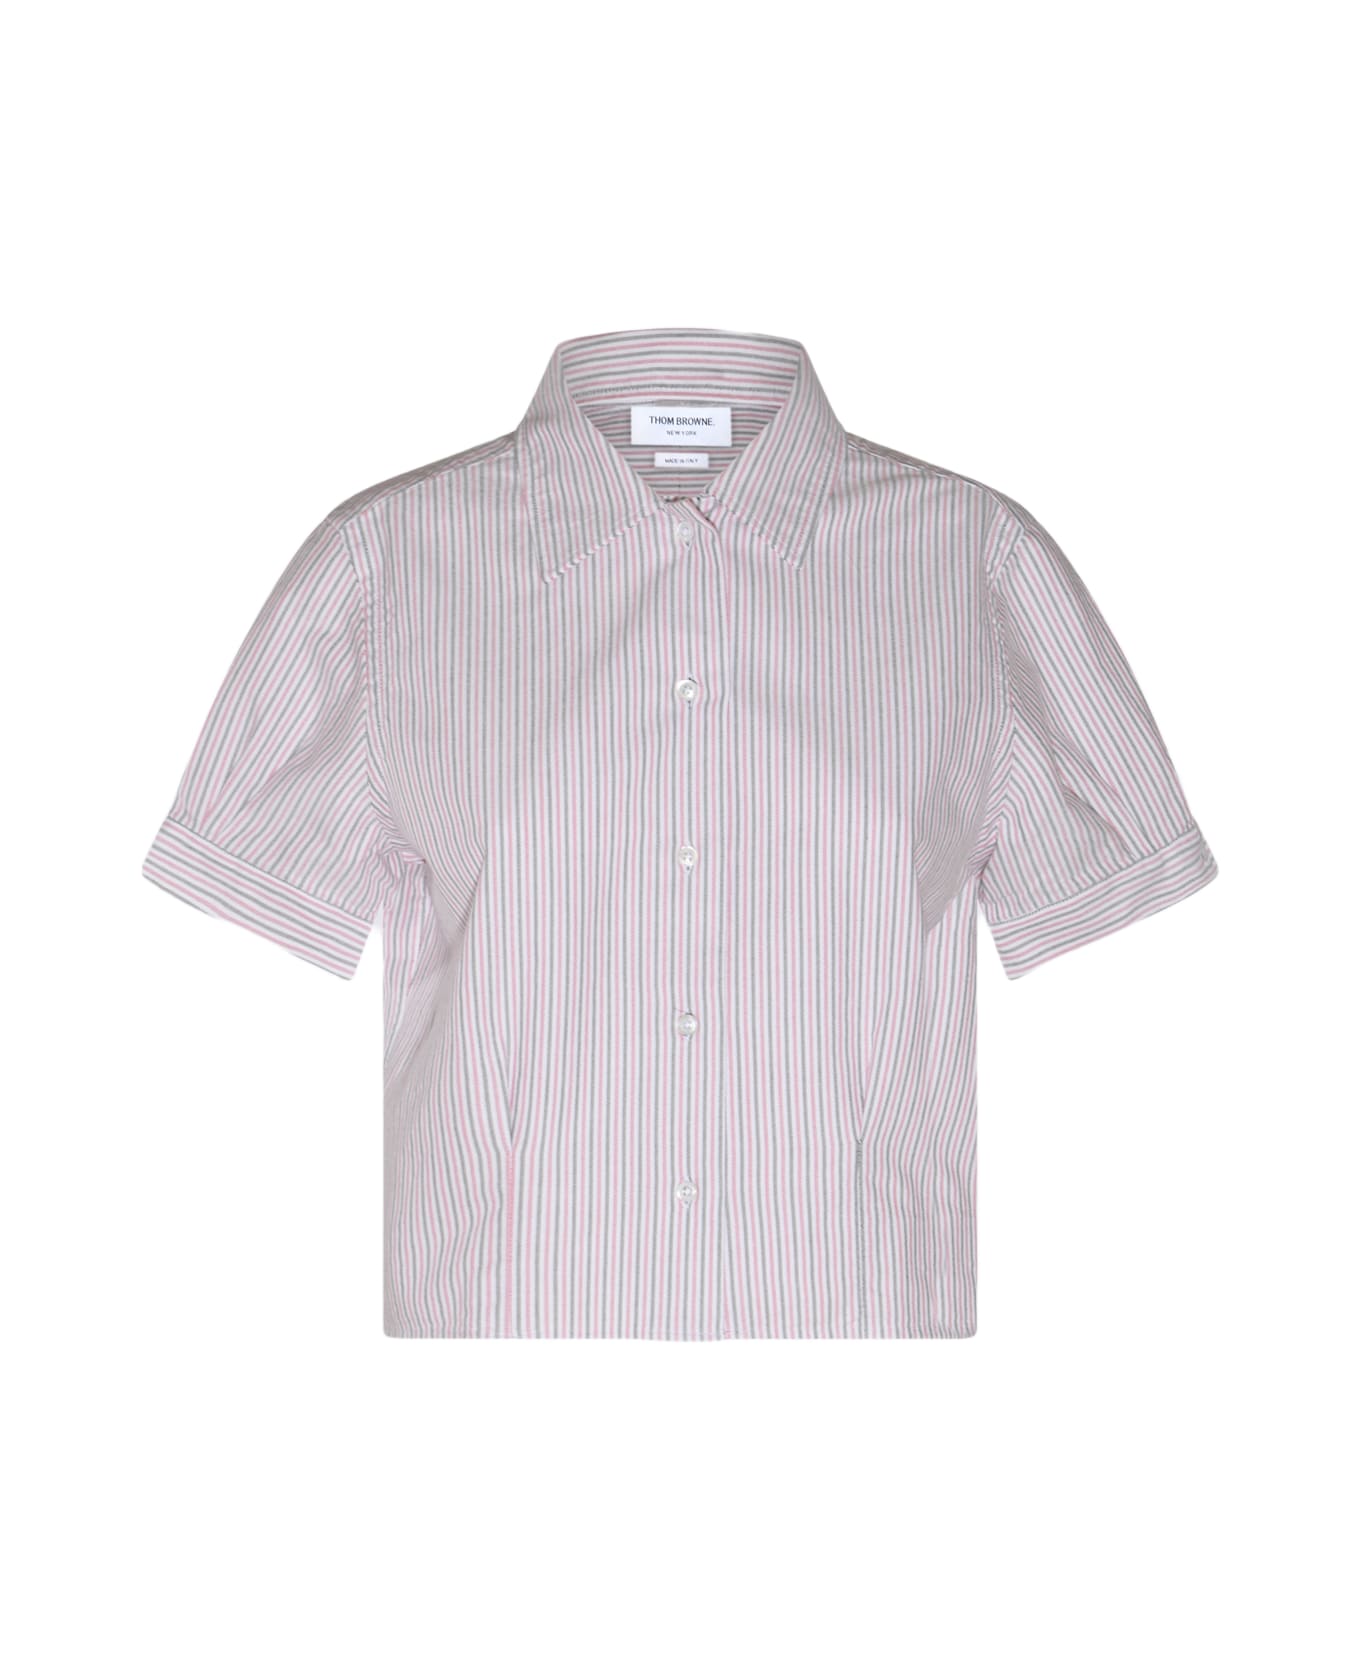 Thom Browne Multicolour Cotton Shirt - Red